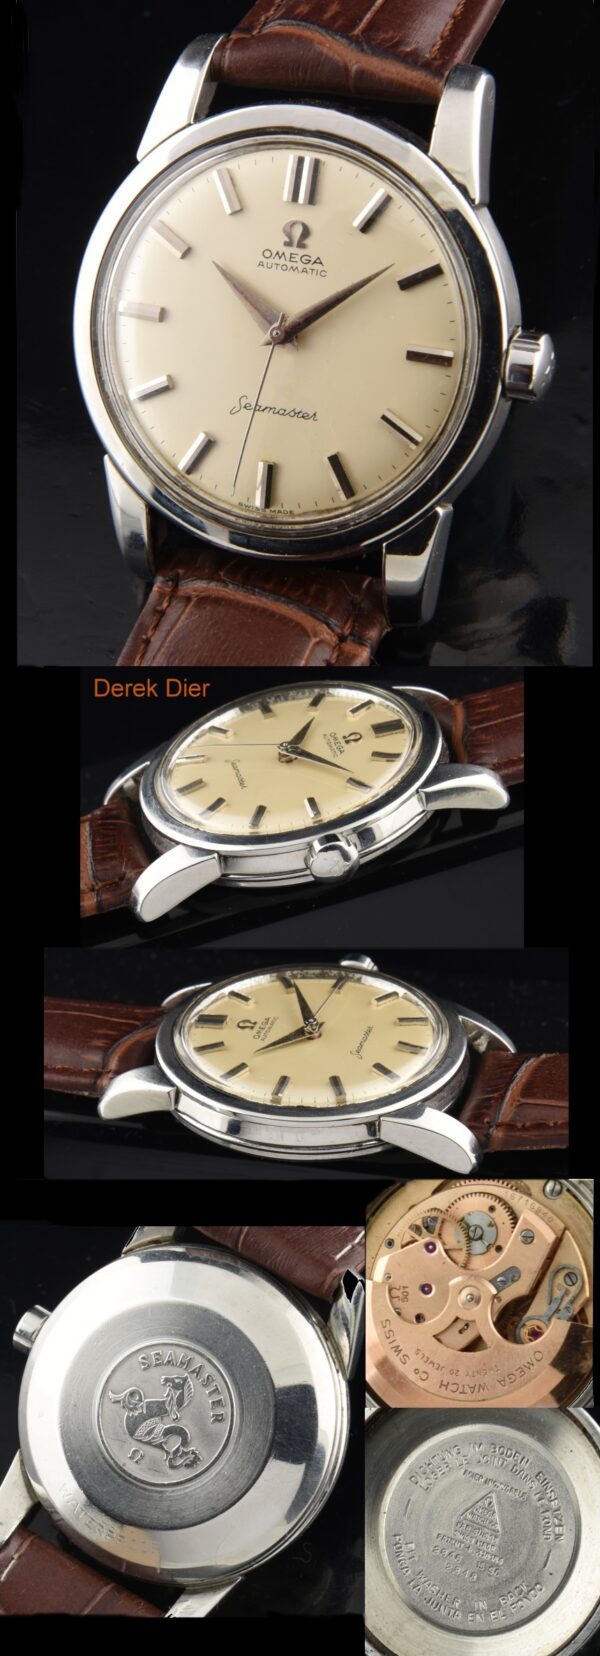 1959 Omega 34mm Seamaster stainless steel watch with original case, beefy lugs, winding crown, dial, and caliber 501 automatic movement.